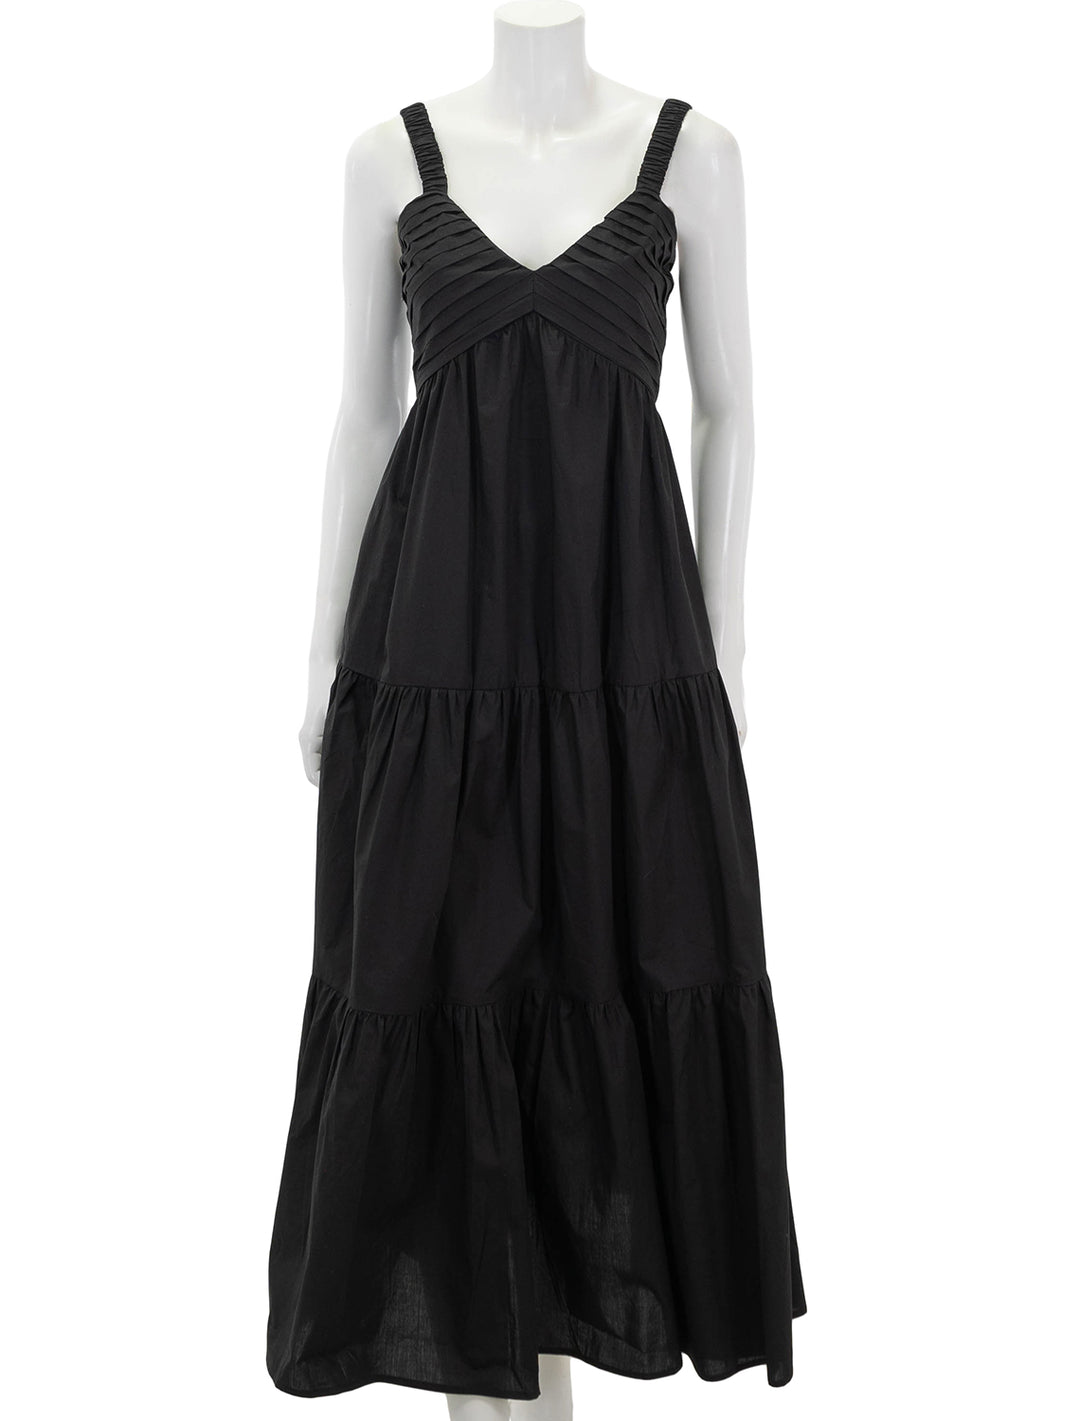 Front view of Steve Madden's eloria dress in black.